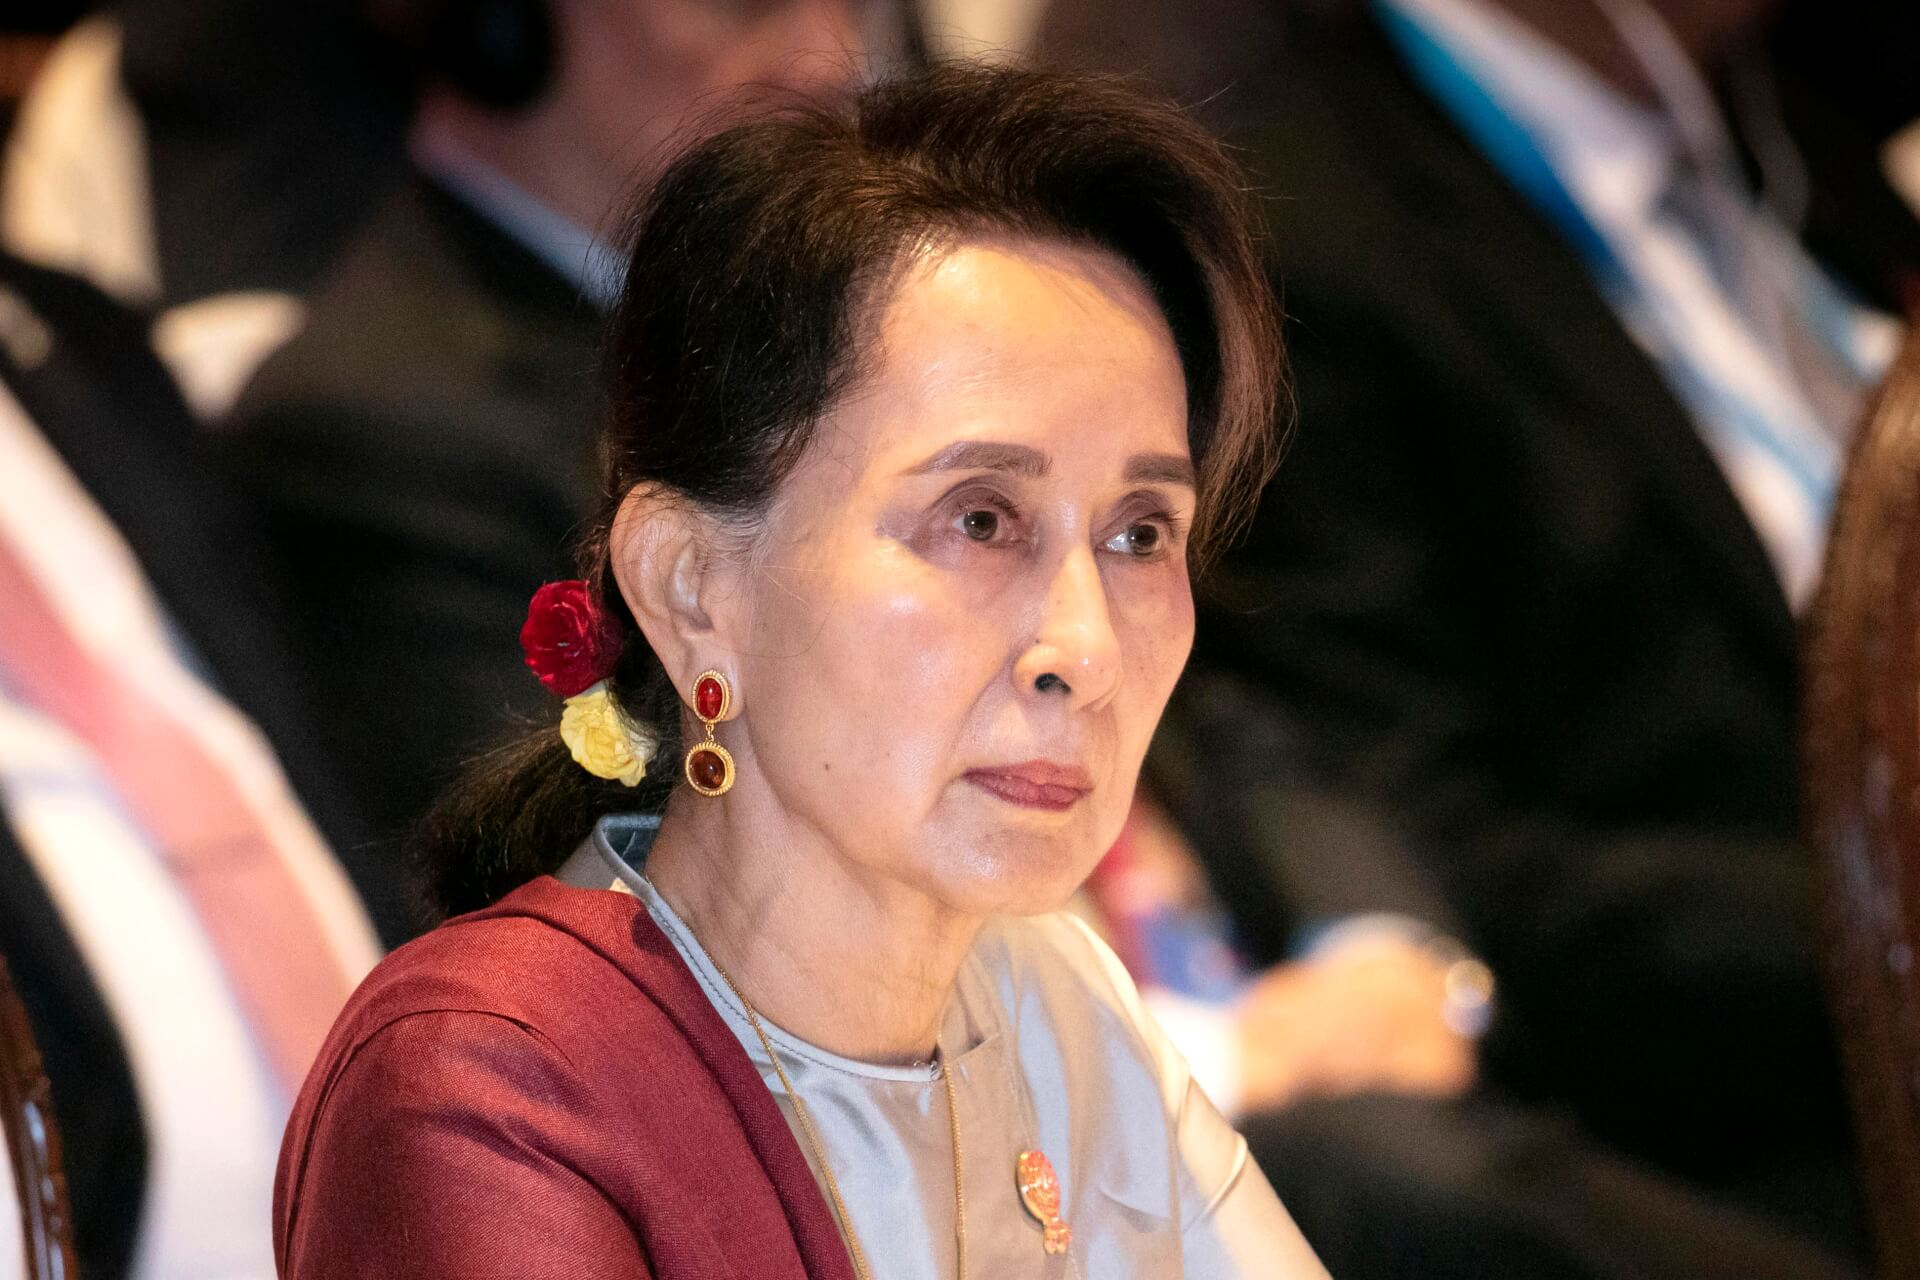 Ex-Myanmar Leader Suu Kyi’s Sentence Rises to 26 Years Following Latest Ruling